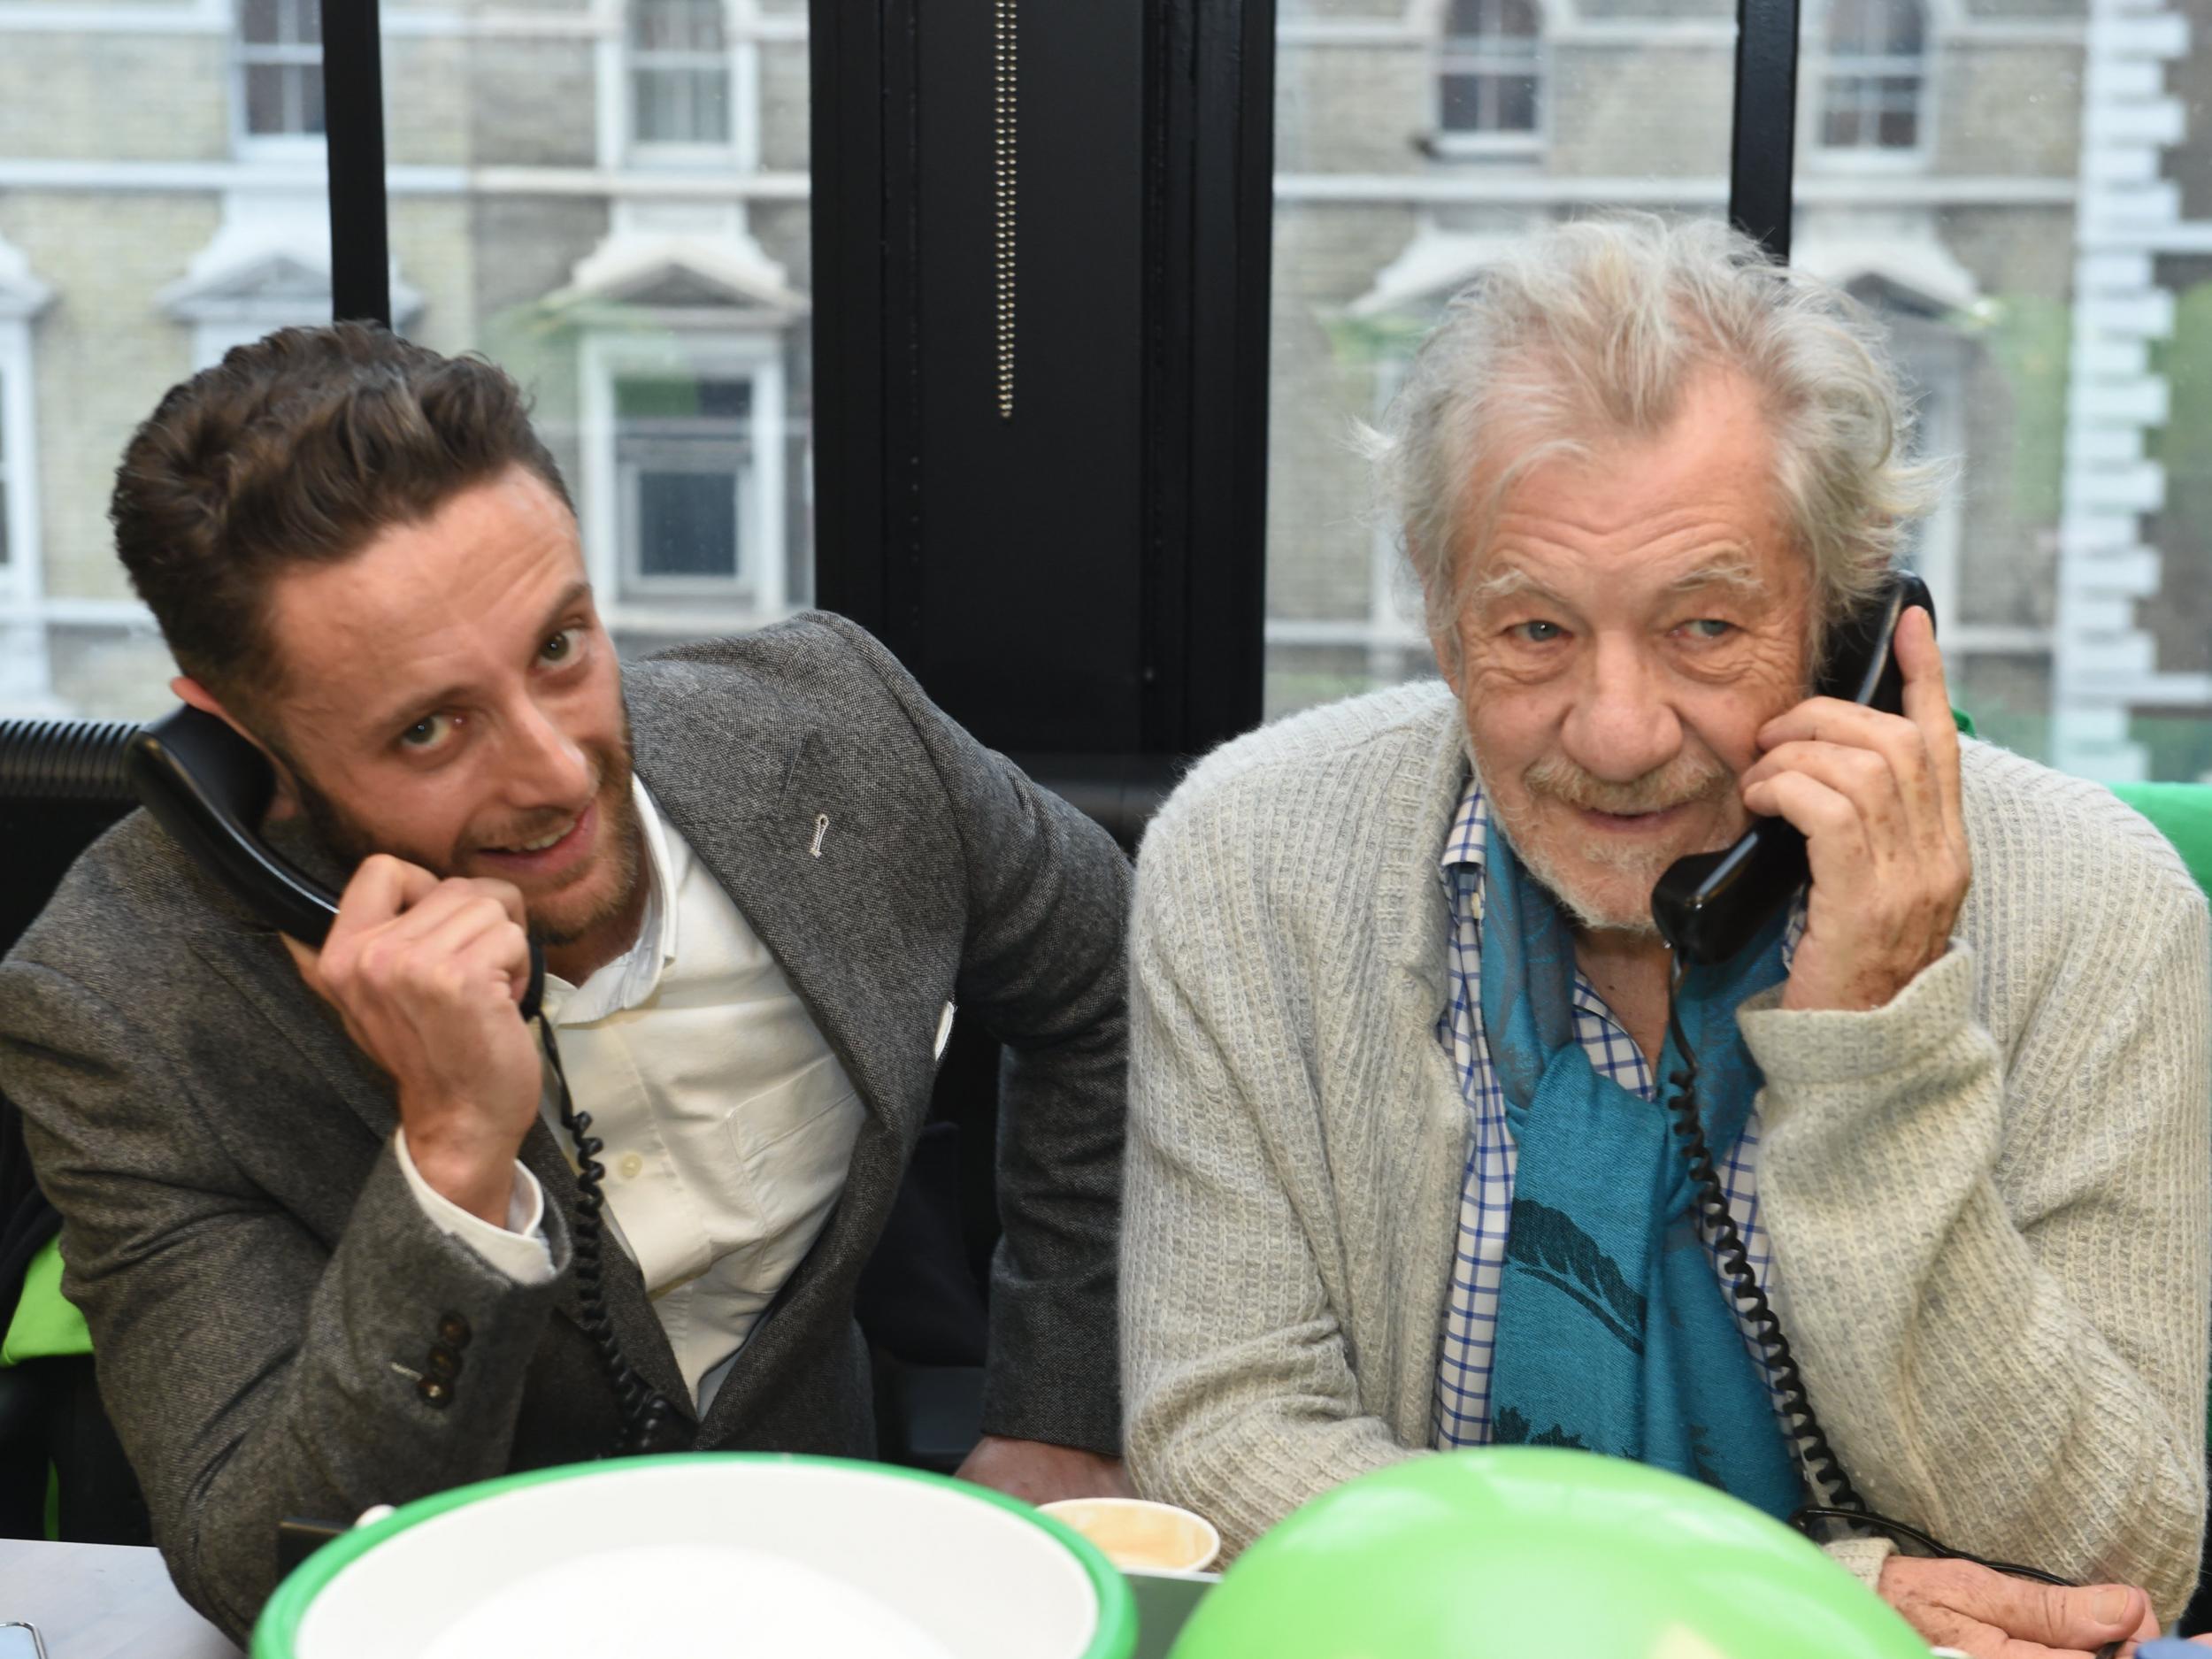 The Independent editor Christian Broughton with actor Ian McKellen